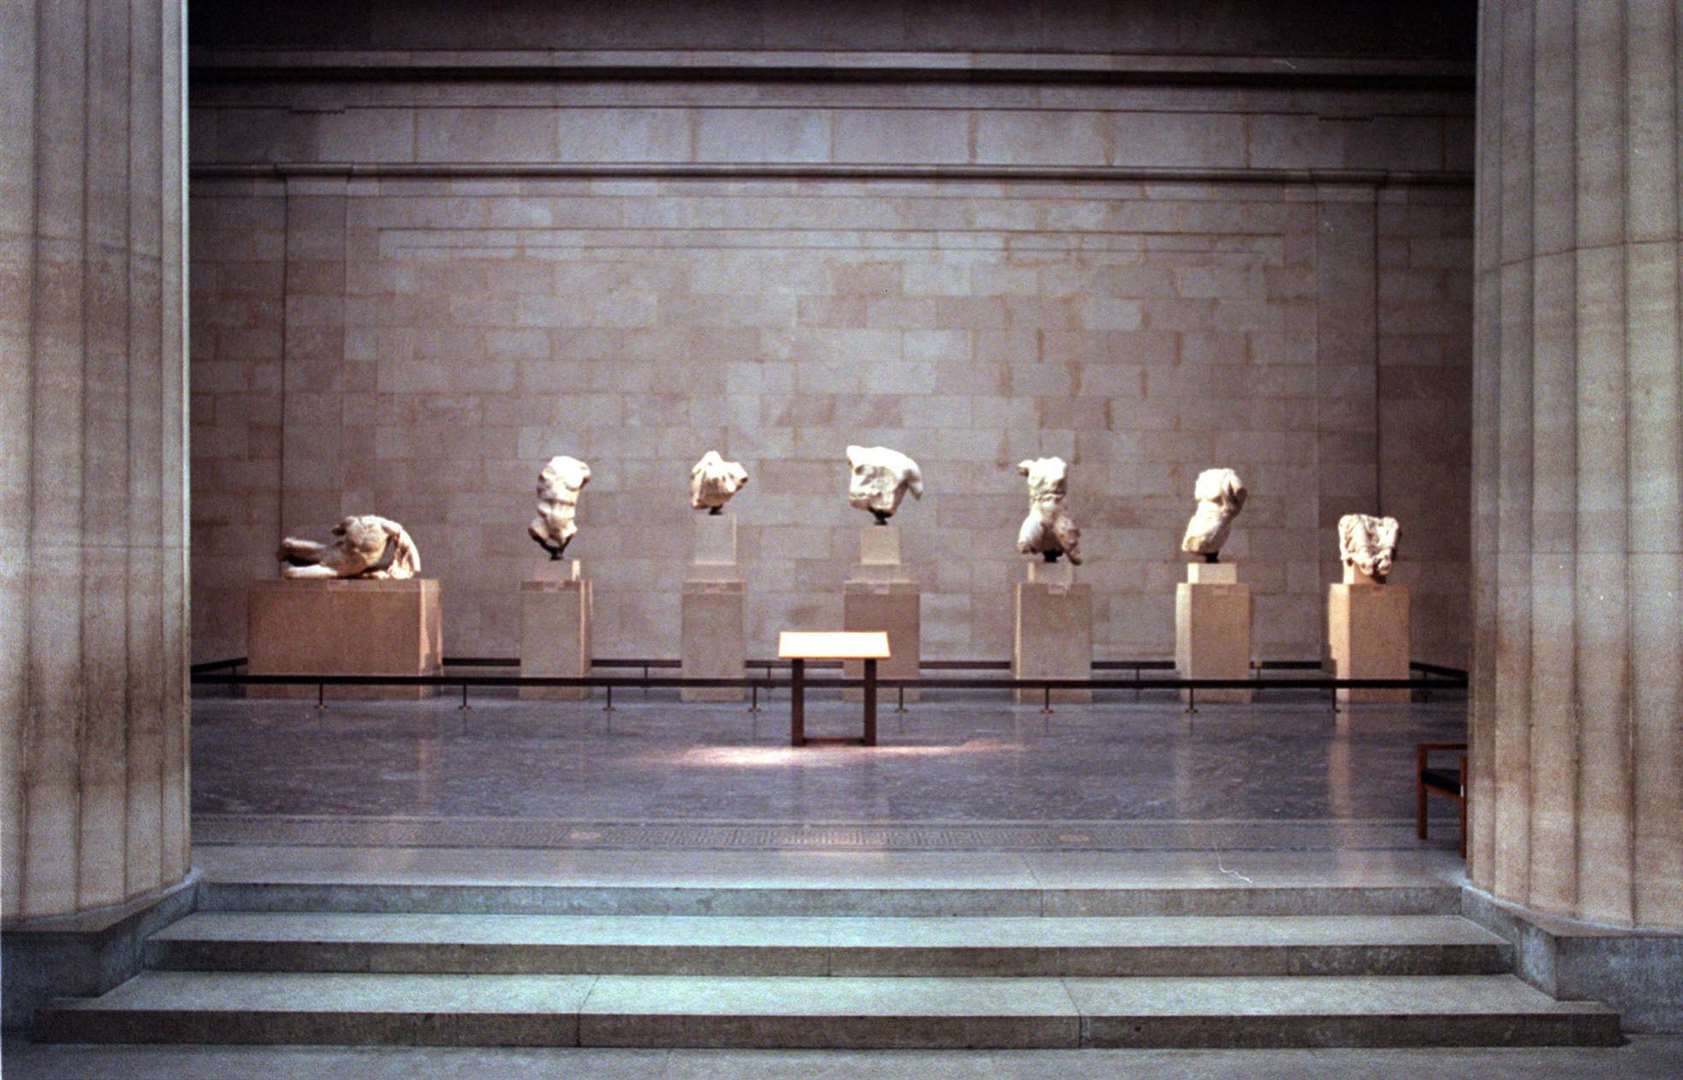 The Parthenon Sculptures, also known as the Elgin Marbles on display in the British Museum (Matthew Fearn/PA)